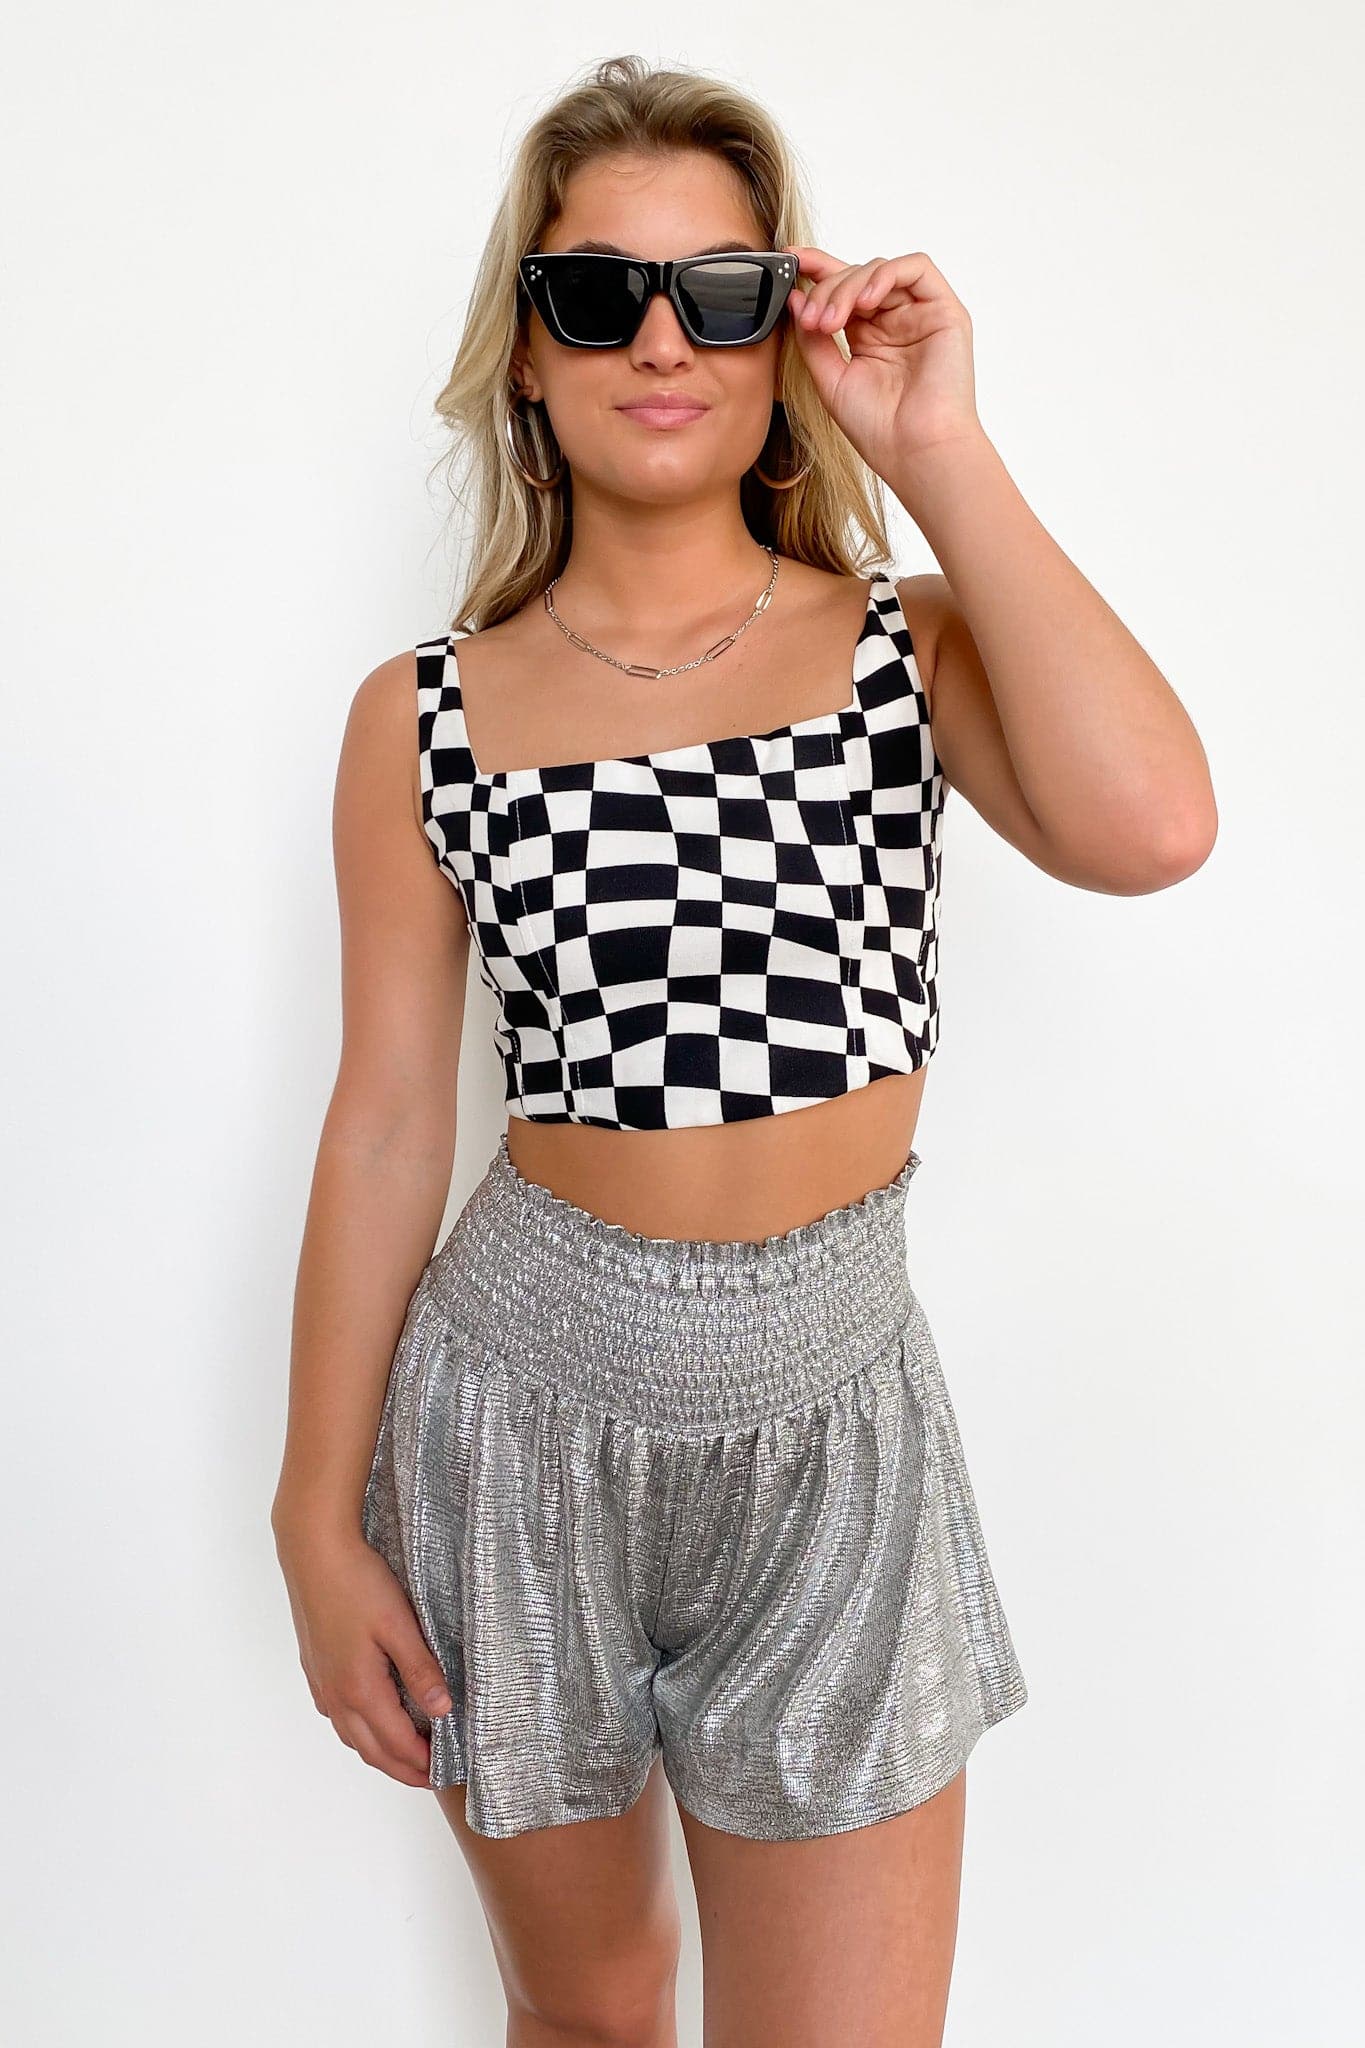  Illusions Checkered Print Tank Top - FINAL SALE - Madison and Mallory